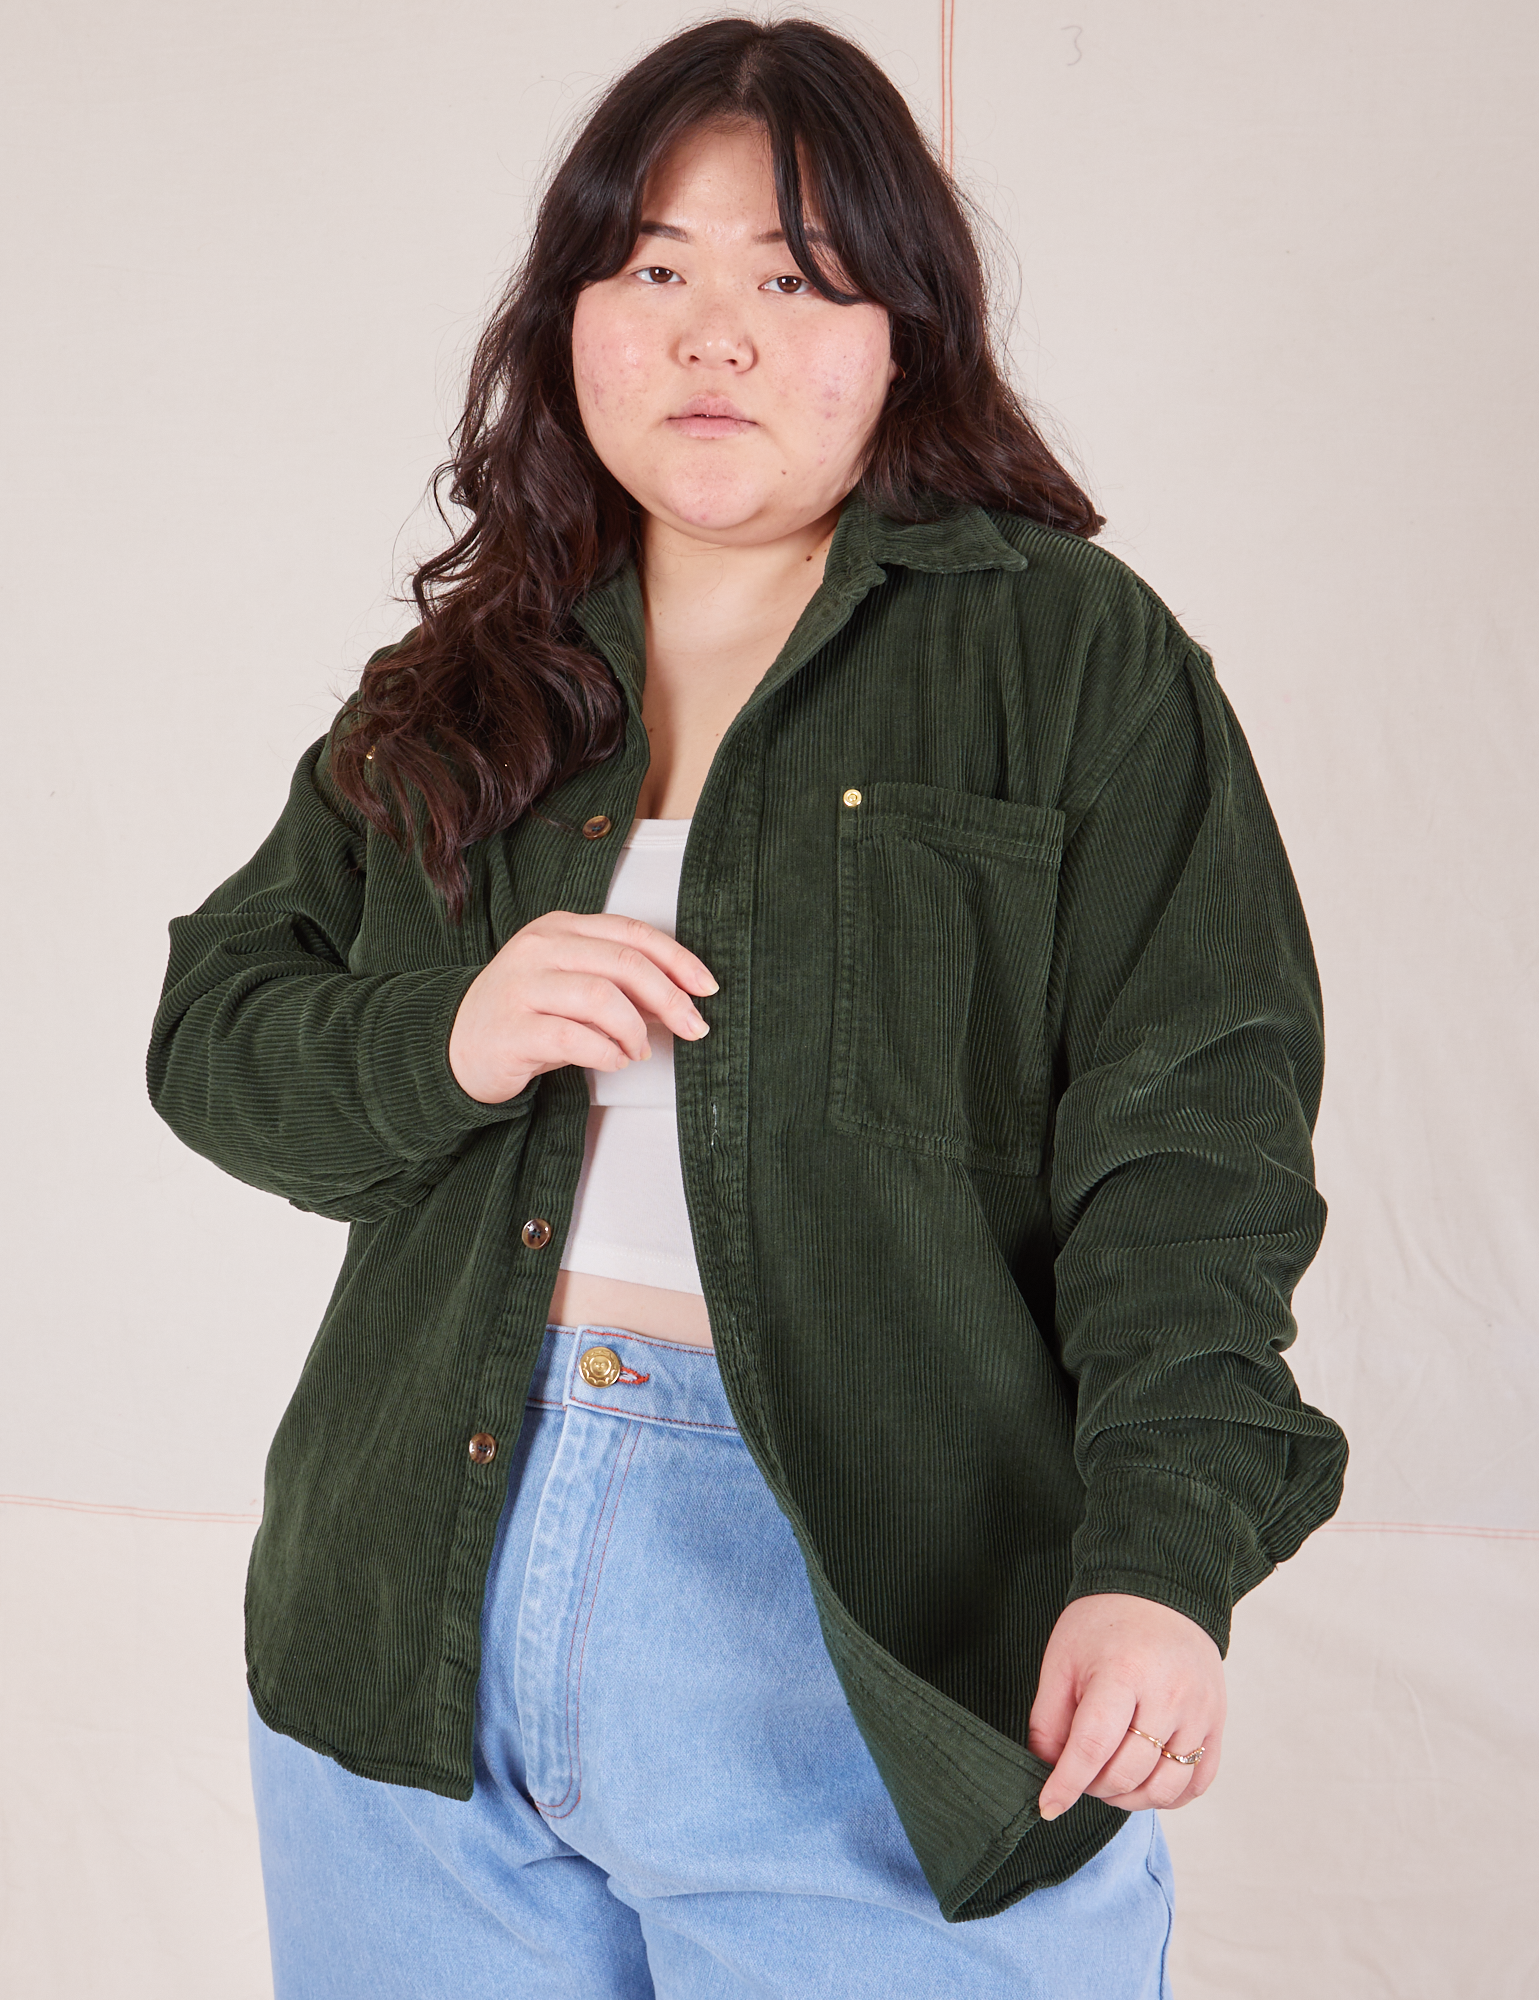 Ashley is 5'7" and wearing M Corduroy Overshirt in Swamp Green